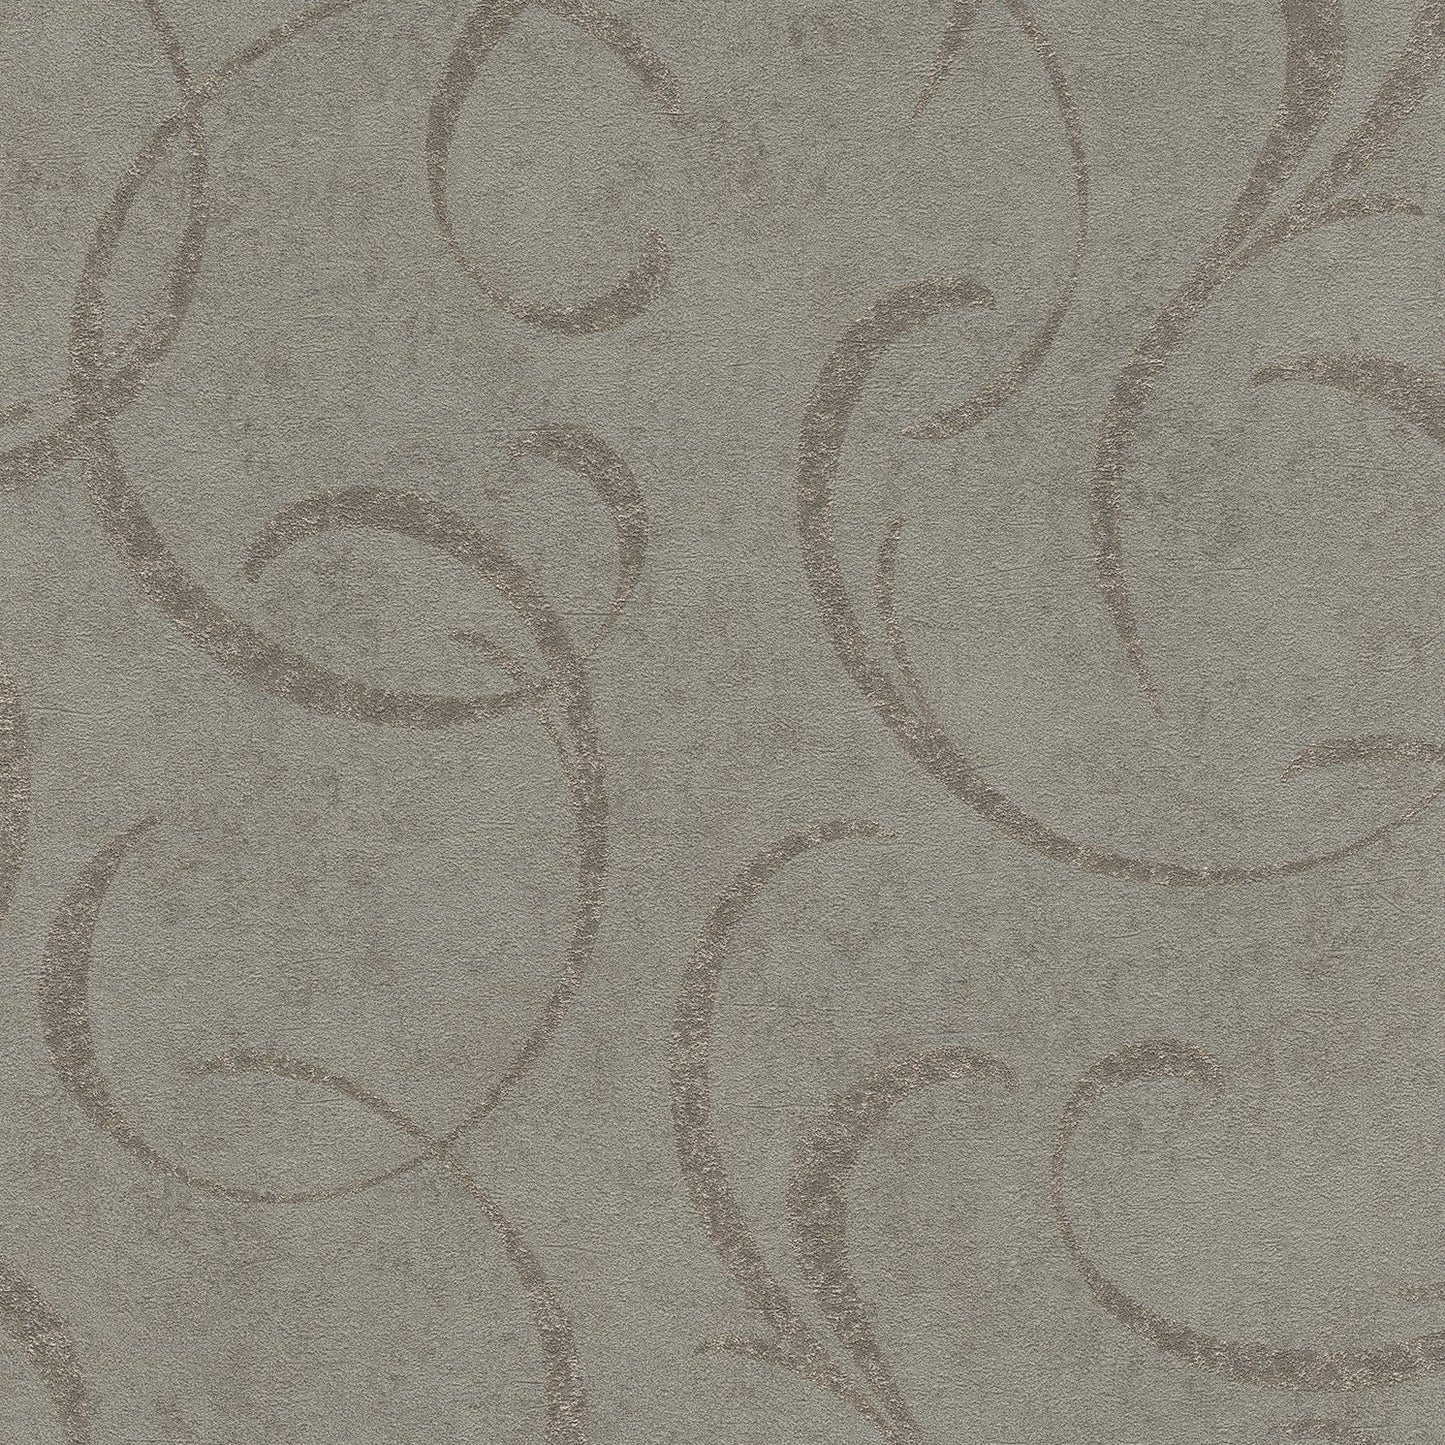 Purchase 2836-467659 Shades of Grey Neutrals Scrolls Wallpaper by Advantage